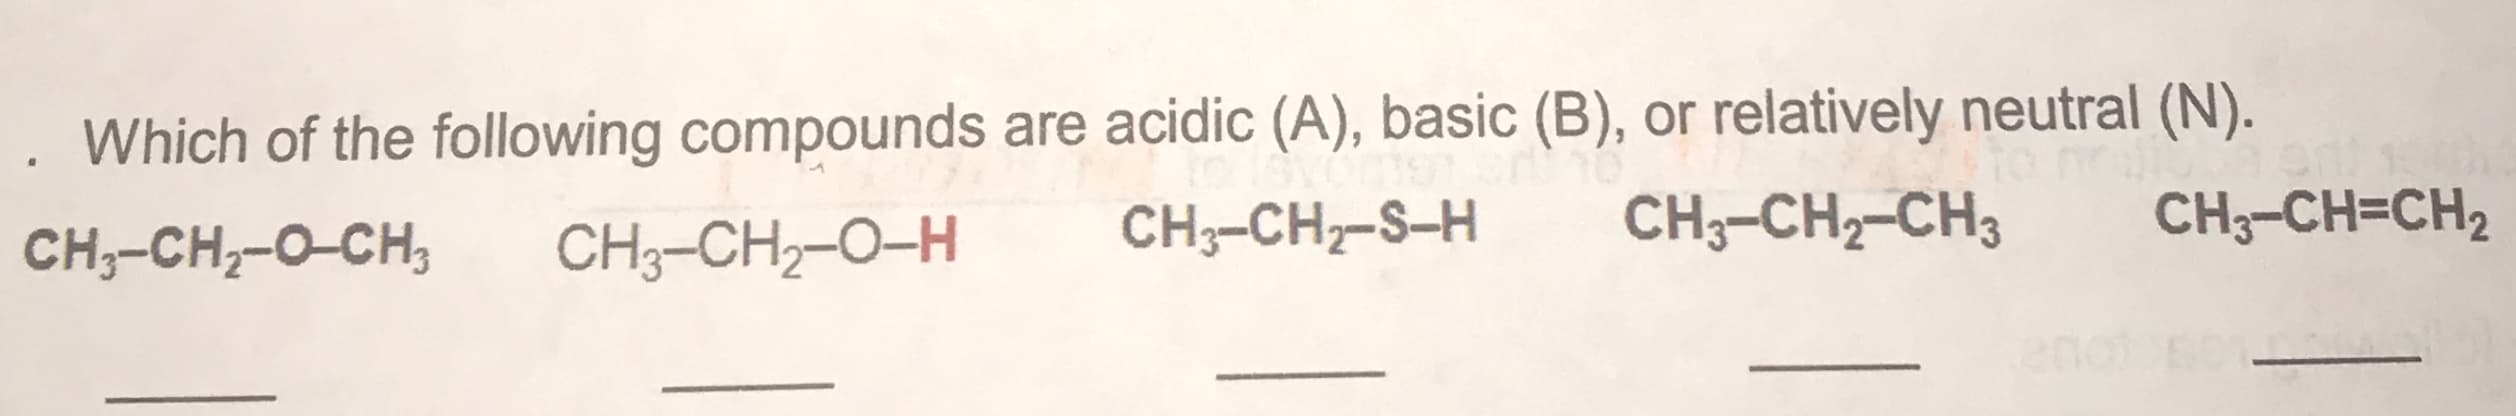 Which of the following compounds are acidic (A), basic (B), or relatively neutral (N).
CH;-CH-S-H
CH;-CH2-CH3
CH;-CH=CH2
CH;-CH,-0-CH,
CH;-CH2-O-H
